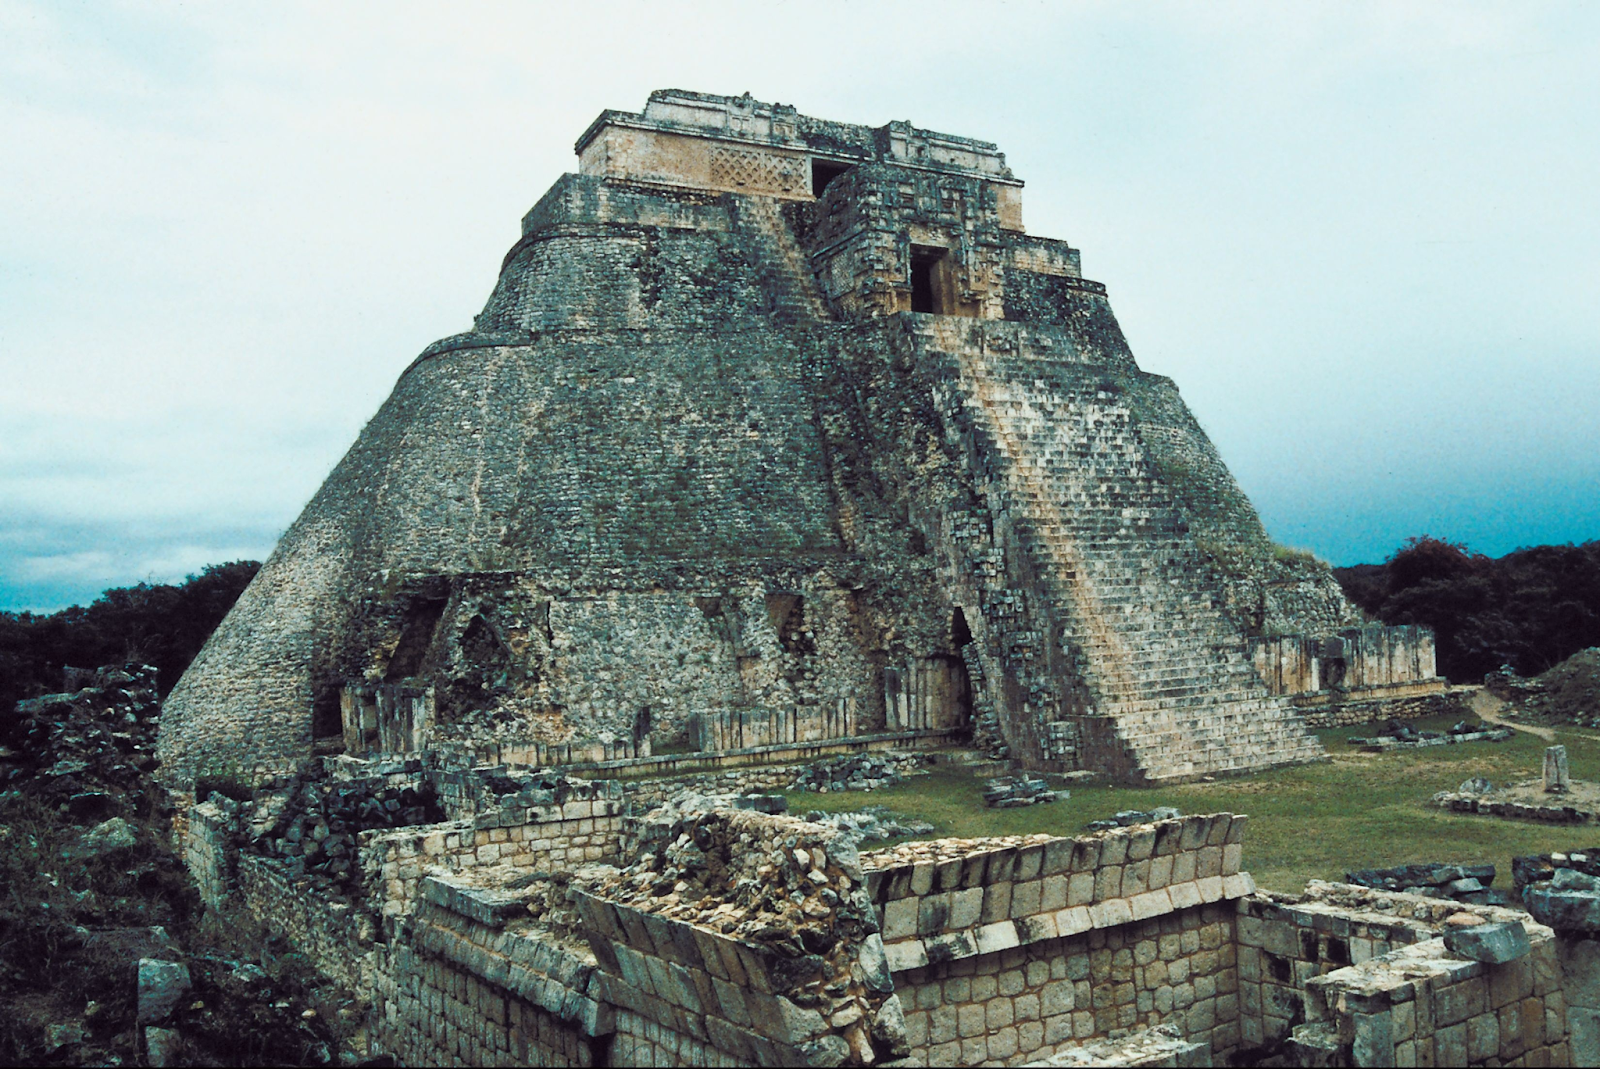 Chacchoben is located approximately an hour away from Costa Maya's cruise port. It is one of the closest ruins. And it offers a less excavated experience compared to more renowned sites like Tulum, Coba, Chichen Itza, and Uxmal